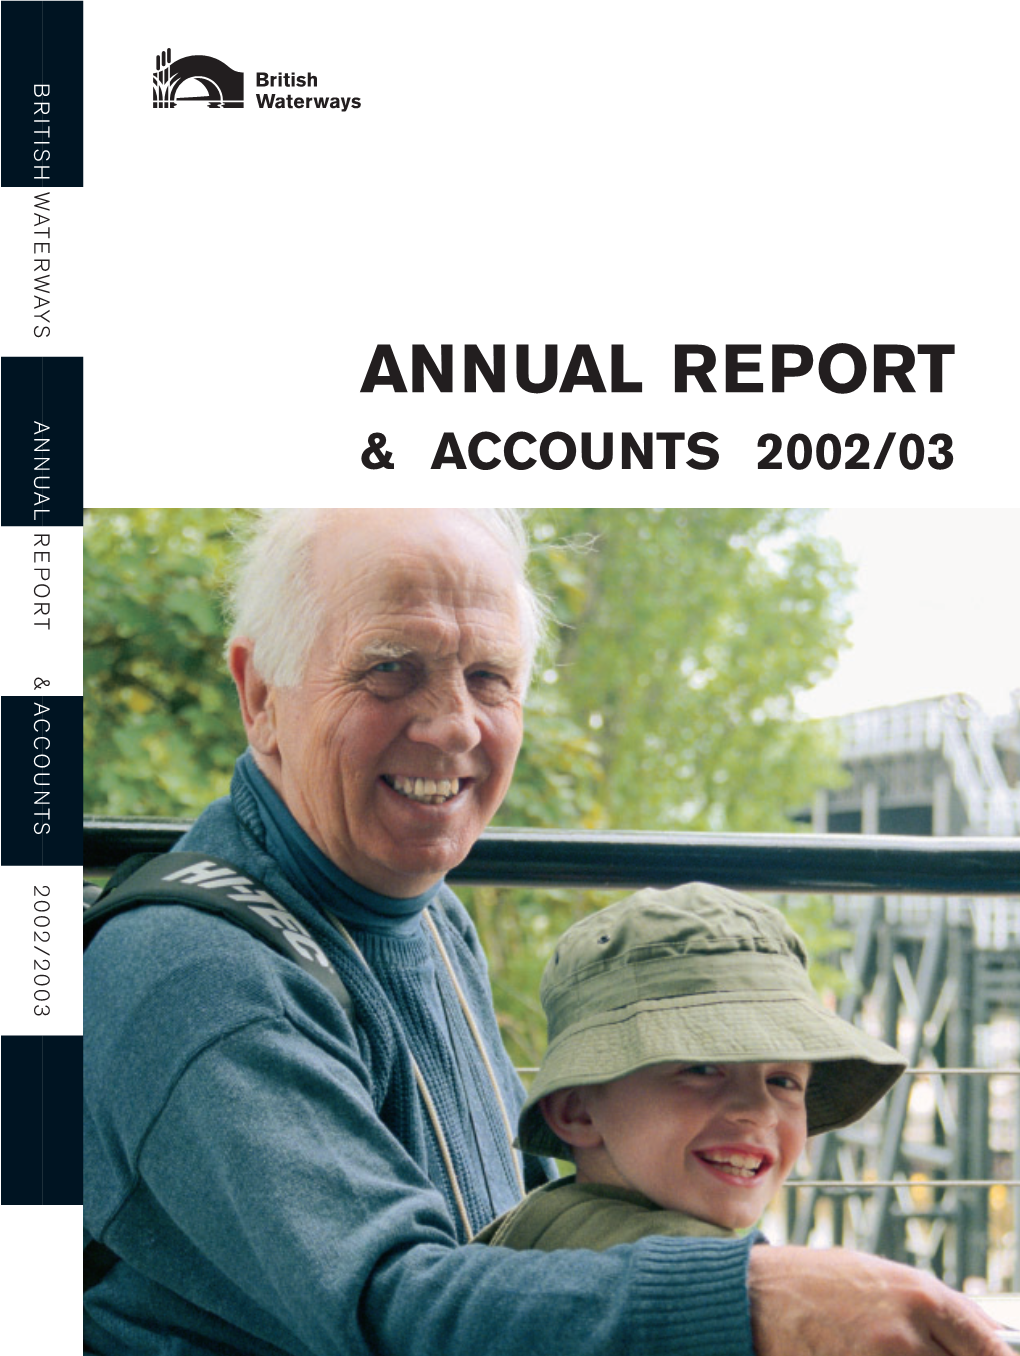 Annual Report and Accounts 2002/03 (6.2MB PDF)